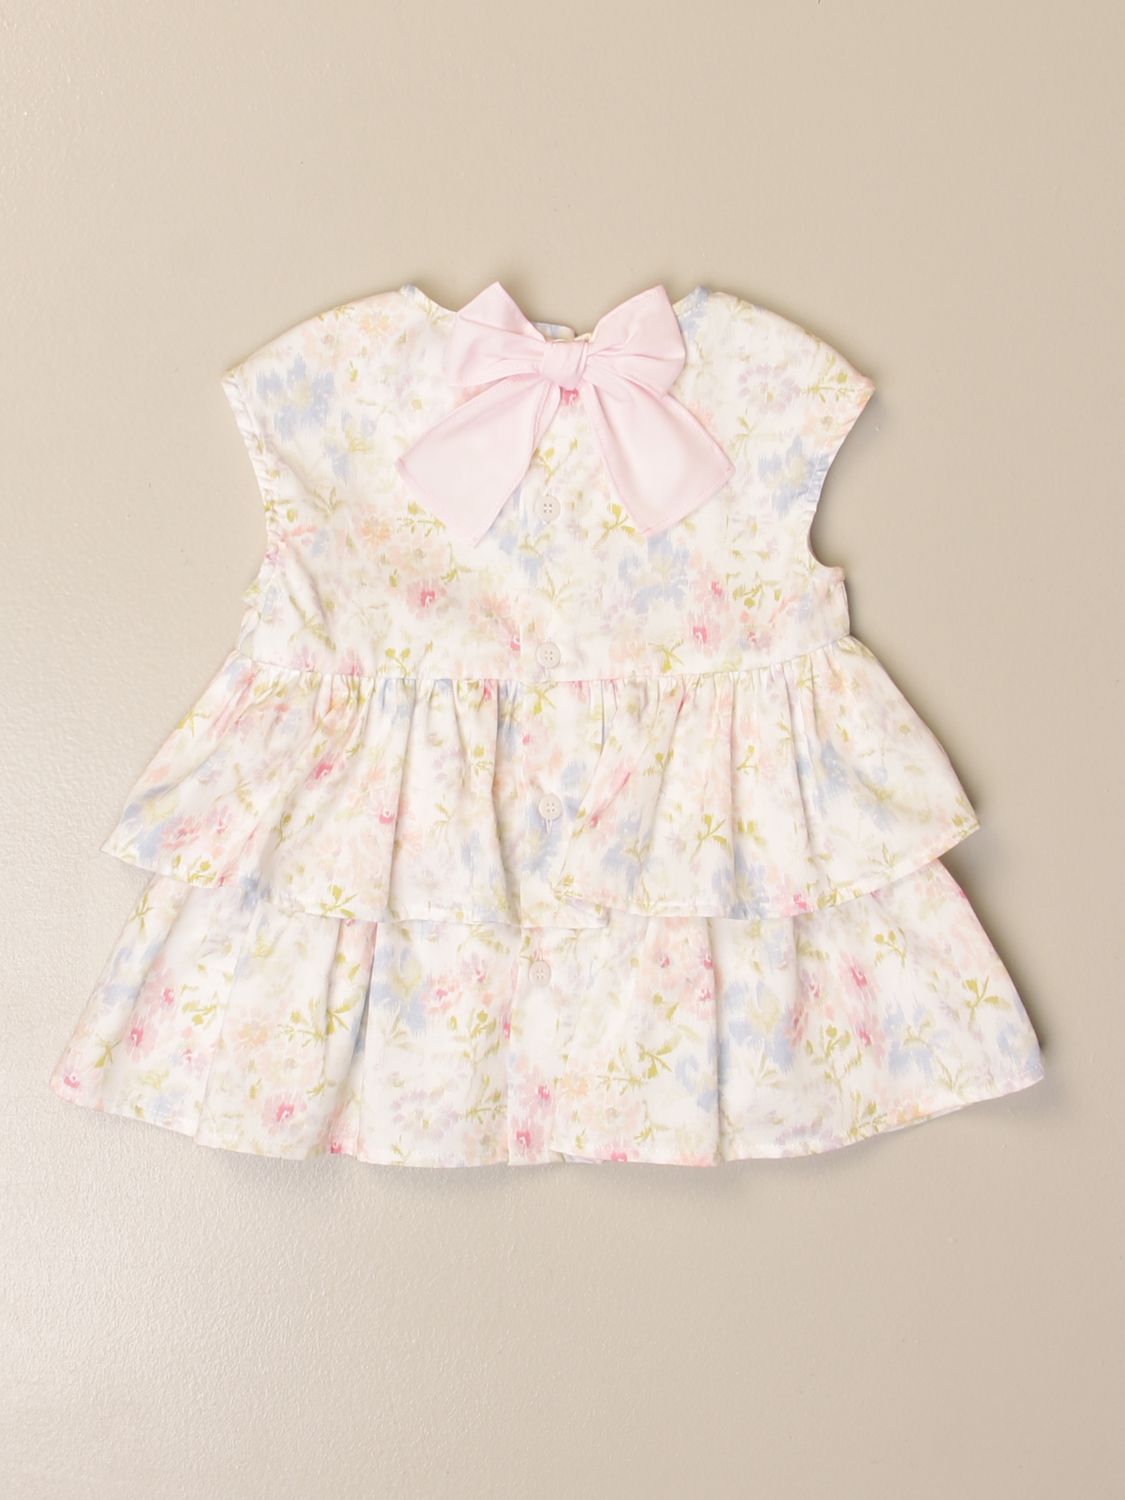 Co-ords Il Gufo: Il Gufo top + shorts patterned set pink 2